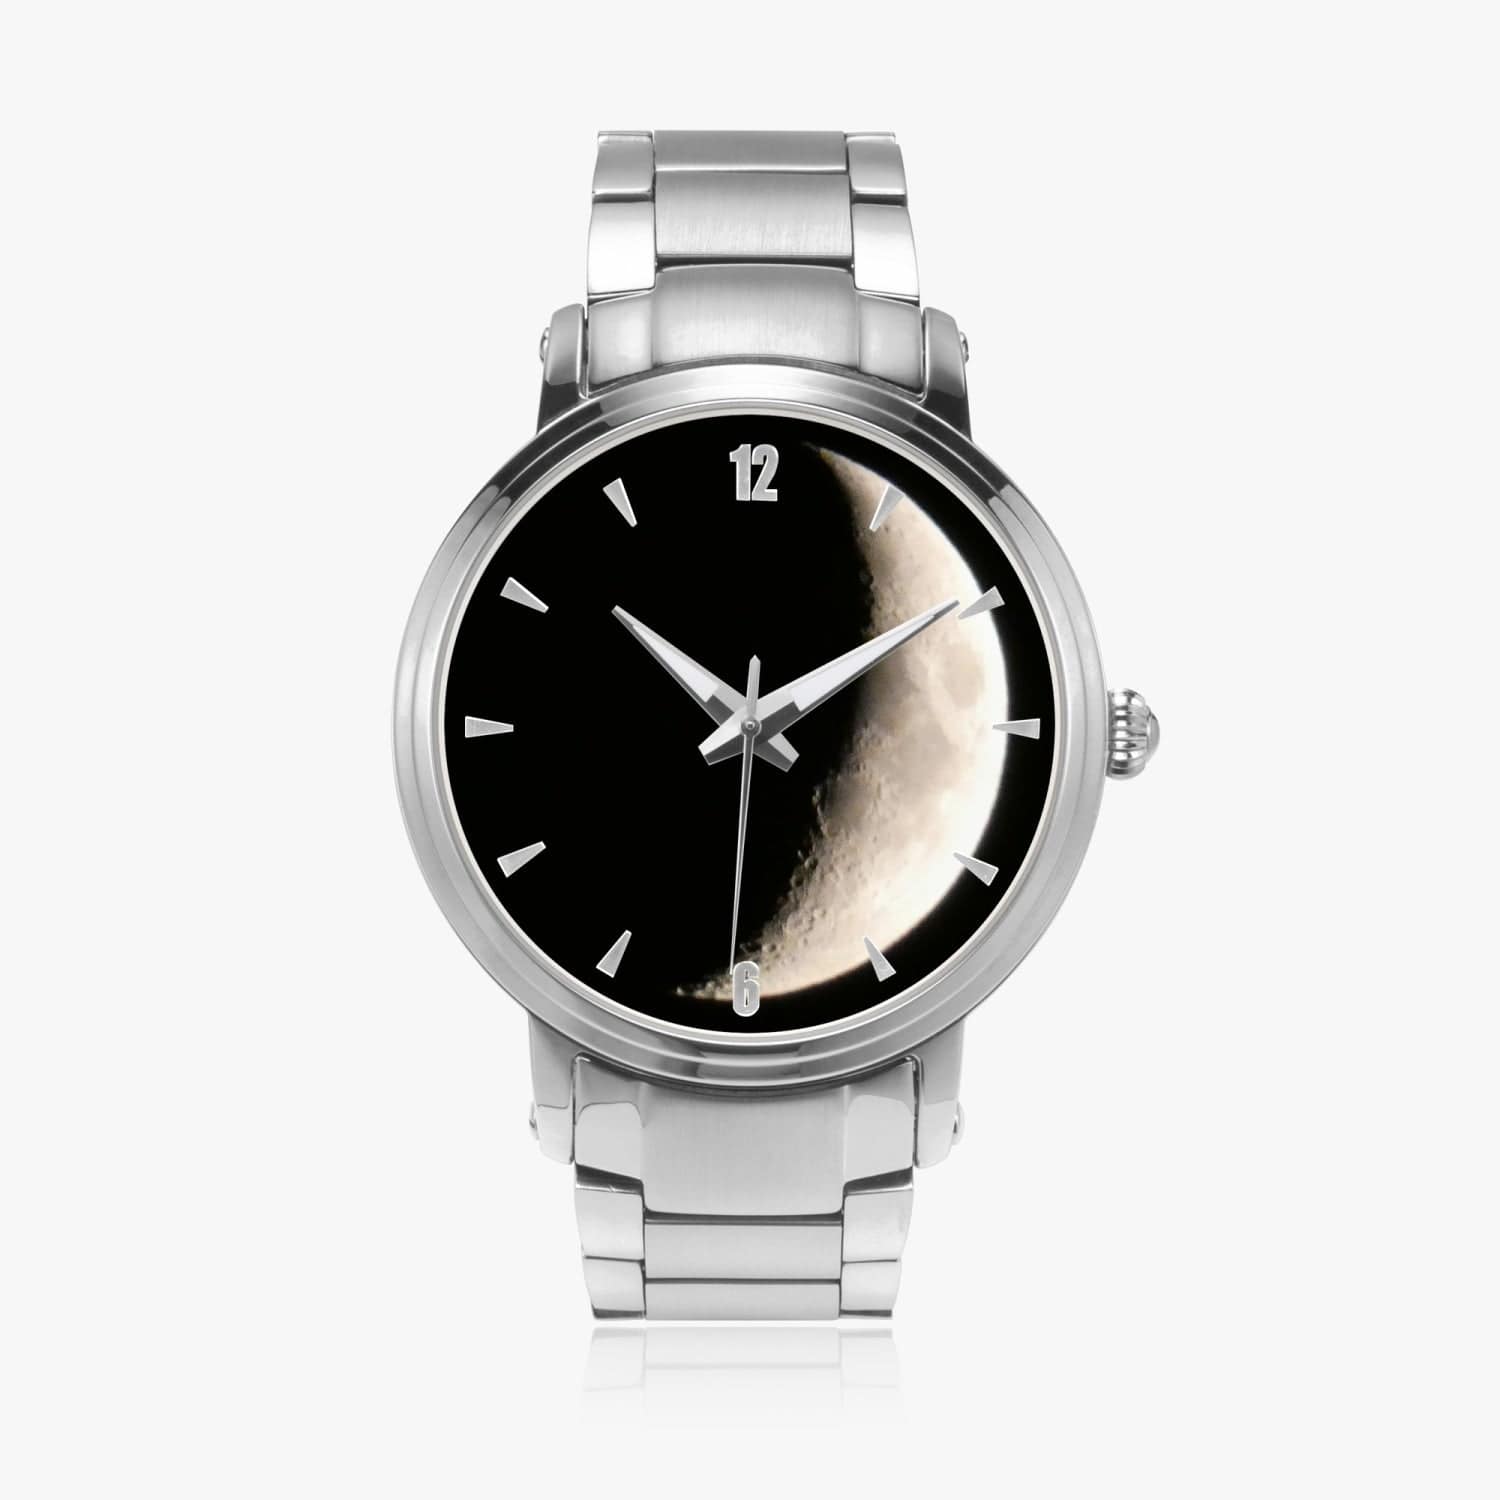 New Moon. New Steel Strap Automatic Watch (With Indicators). Designer watch by Sensus Studio design